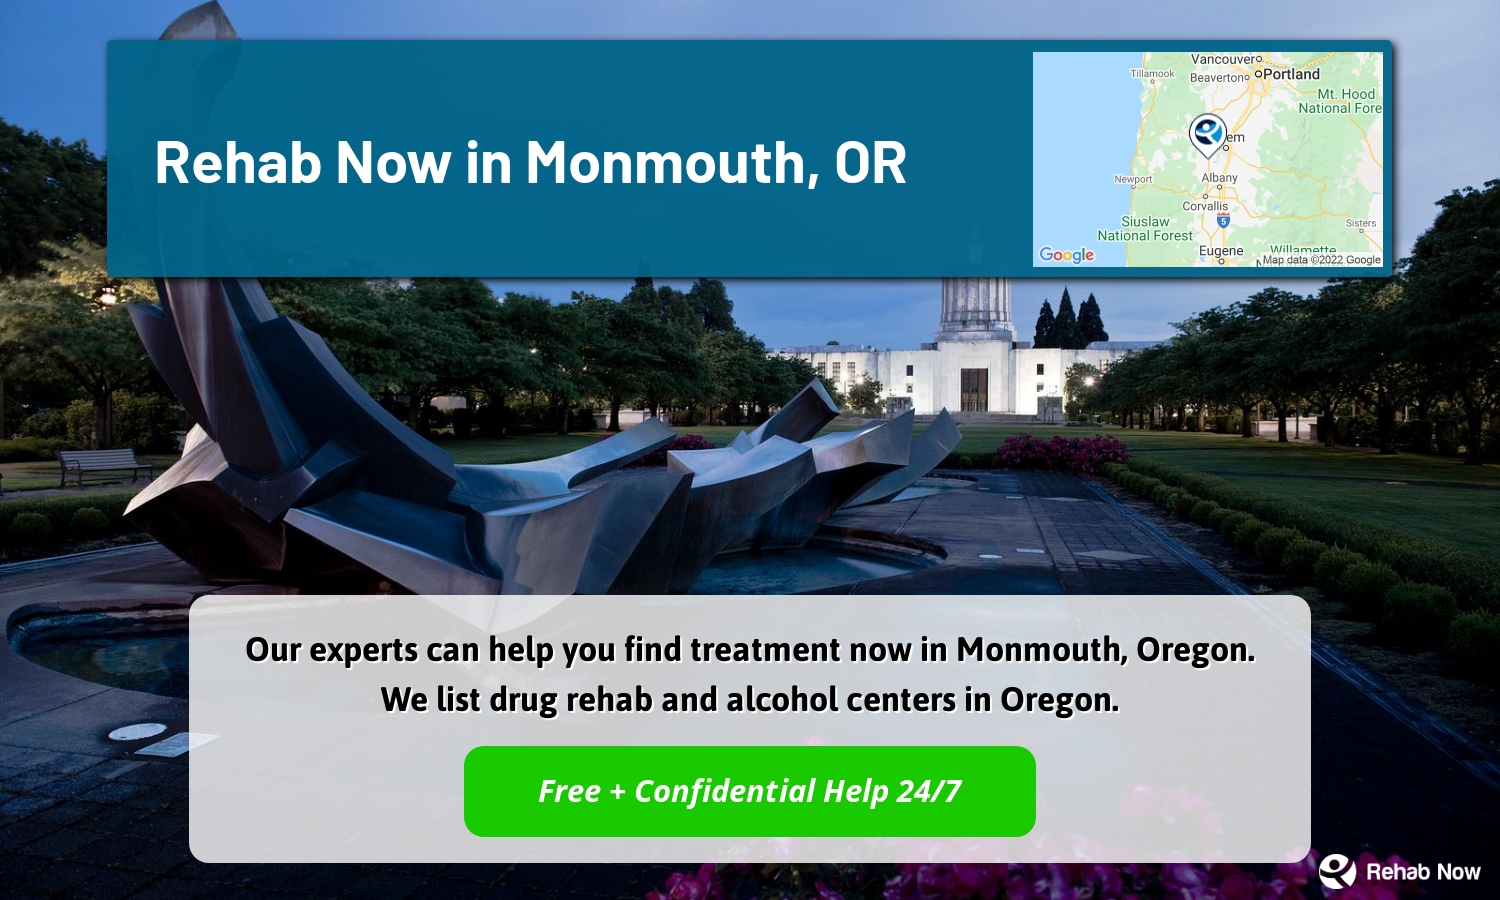 Our experts can help you find treatment now in Monmouth, Oregon. We list drug rehab and alcohol centers in Oregon.